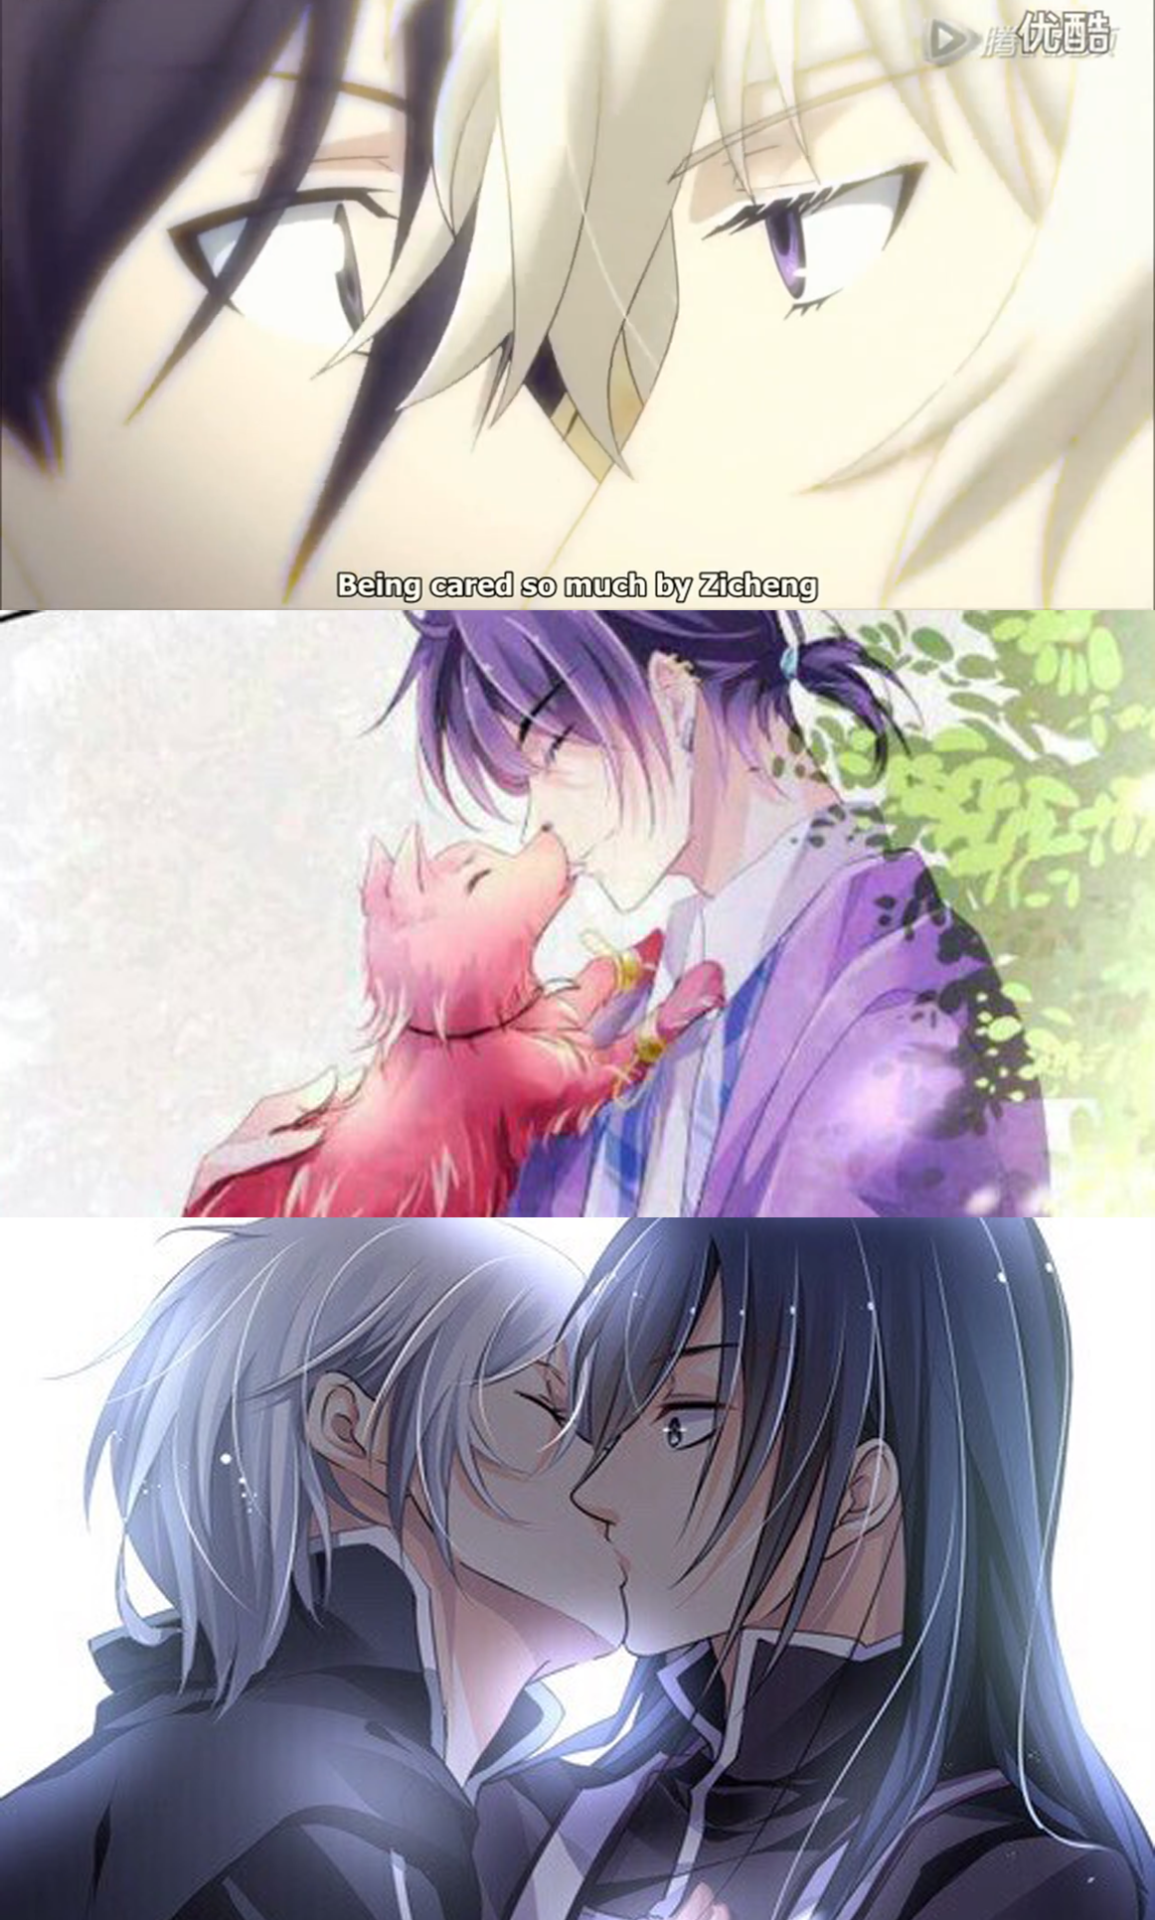 Spiritpact  Ling Qi] they're so soft 🥺❤️ : r/wholesomeyaoi